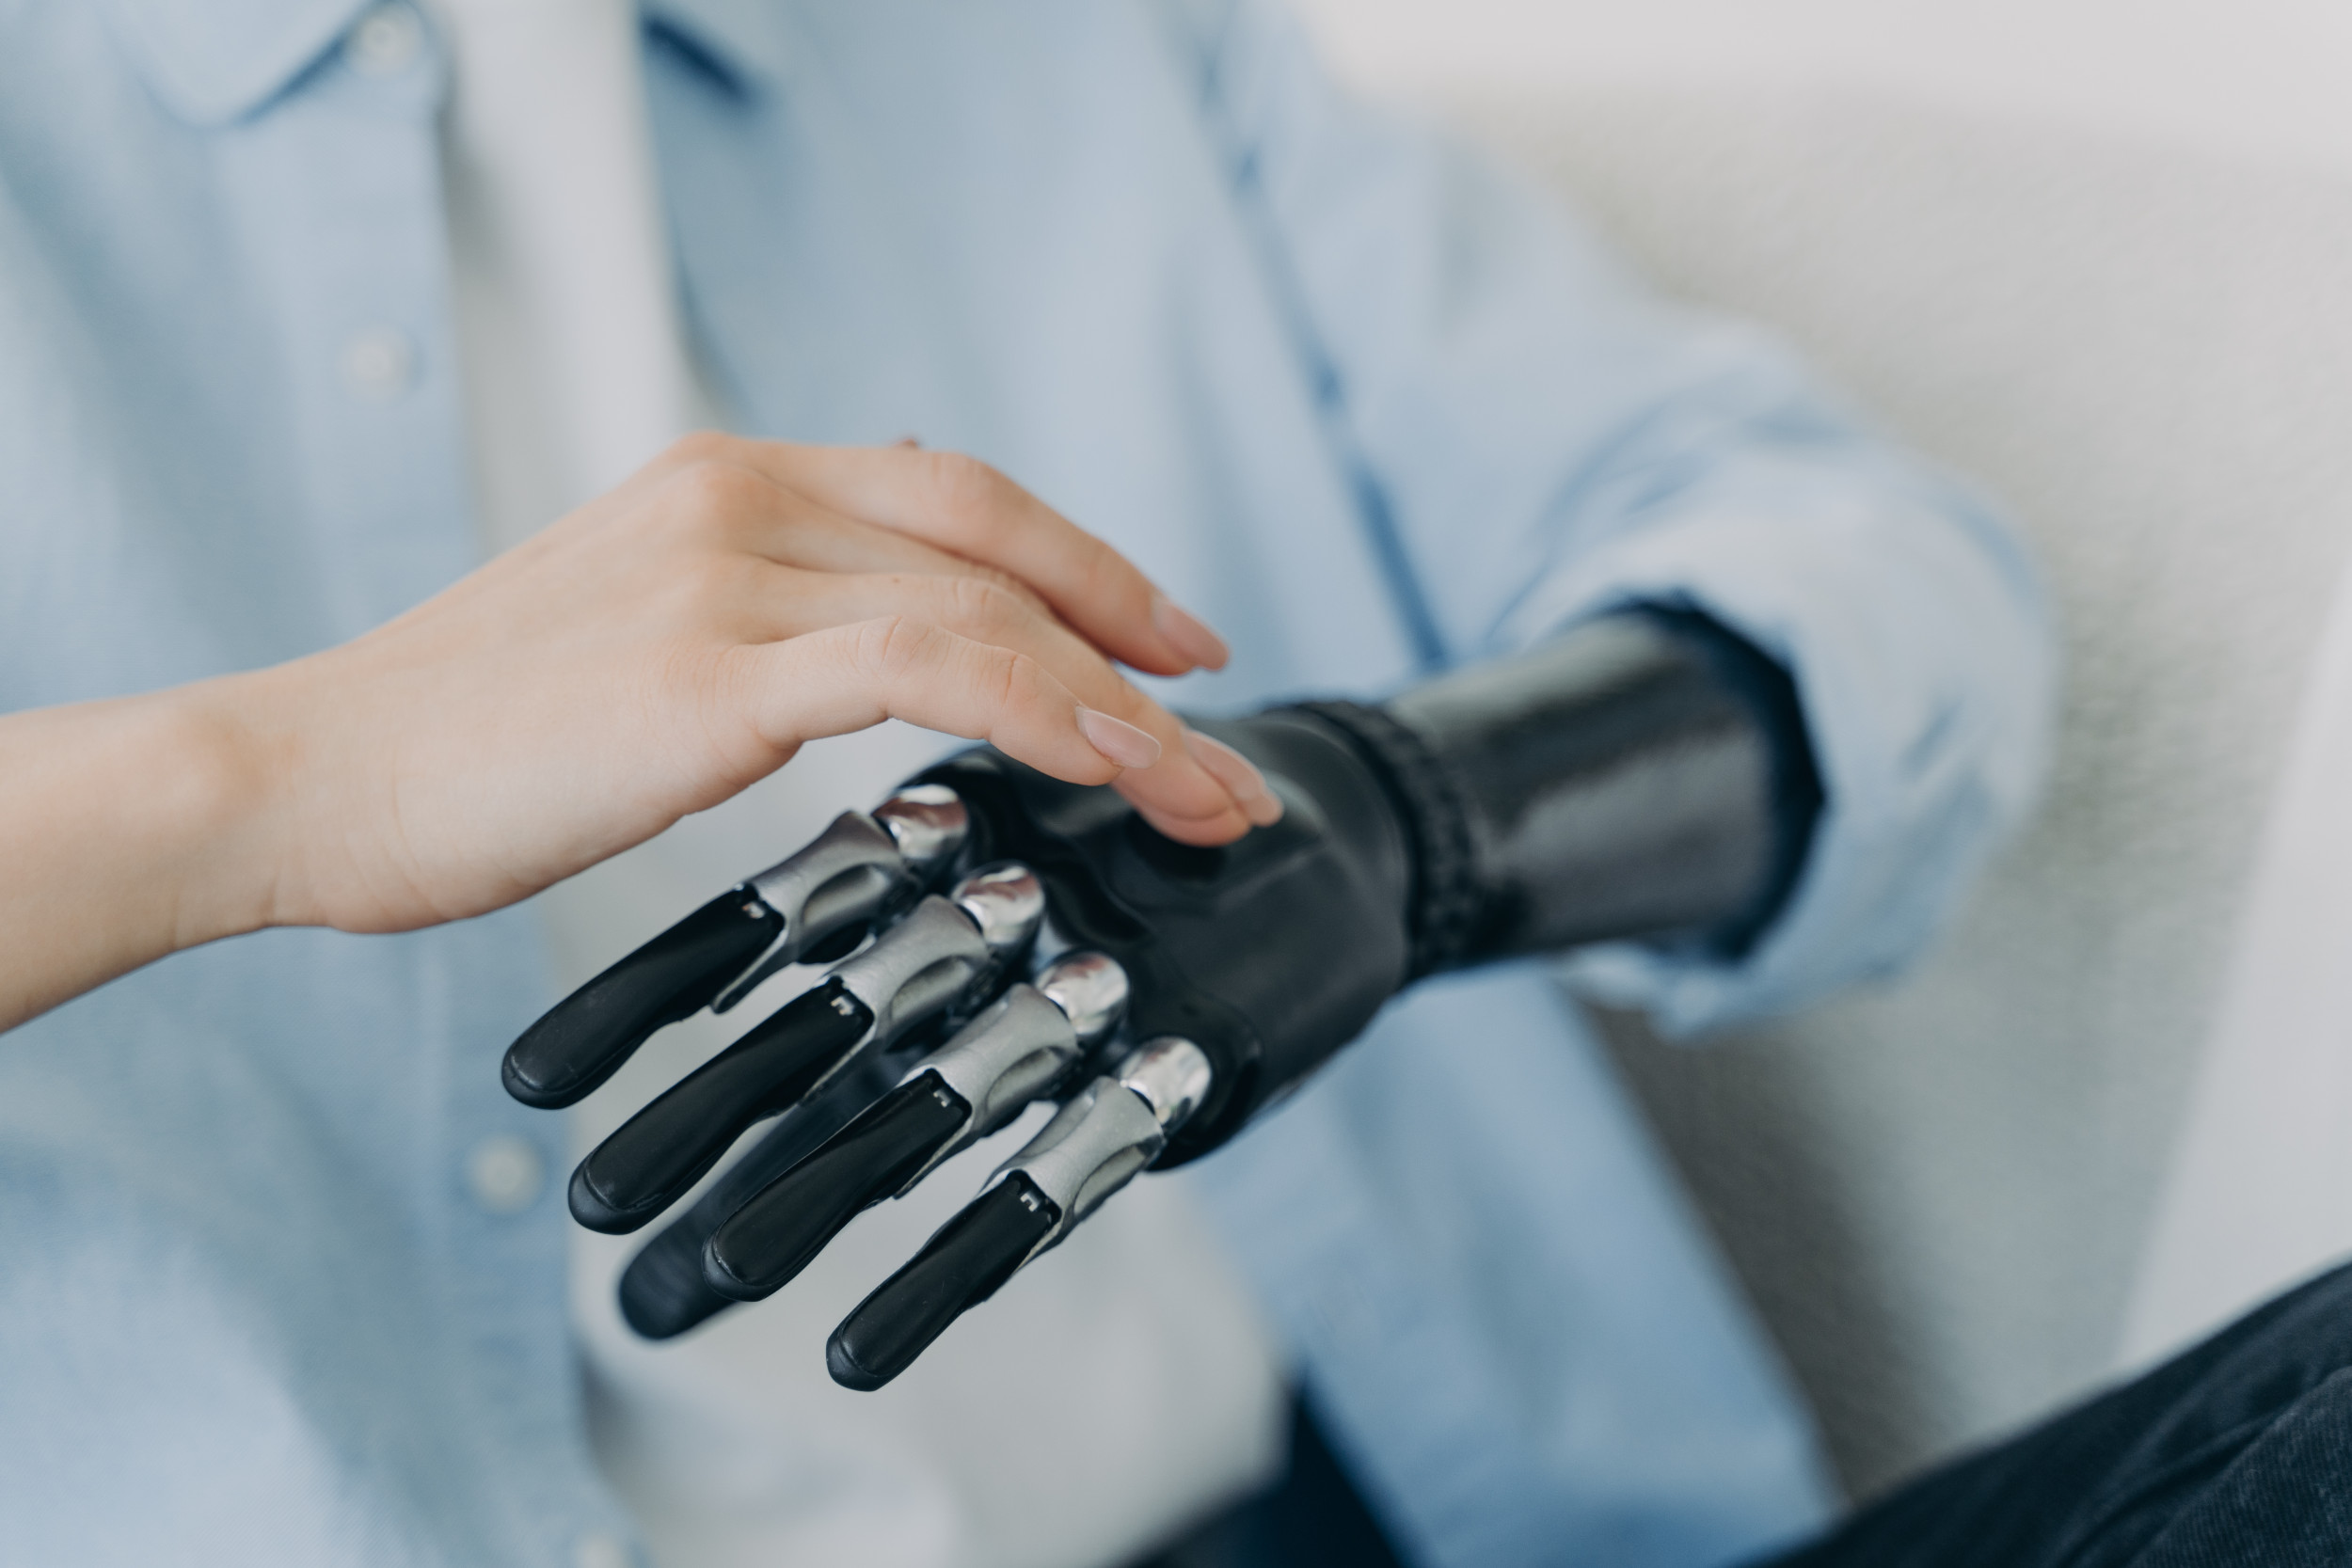 Man With Amputated Arm Gets Bionic Hand in Surgical Breakthrough - Newsweek